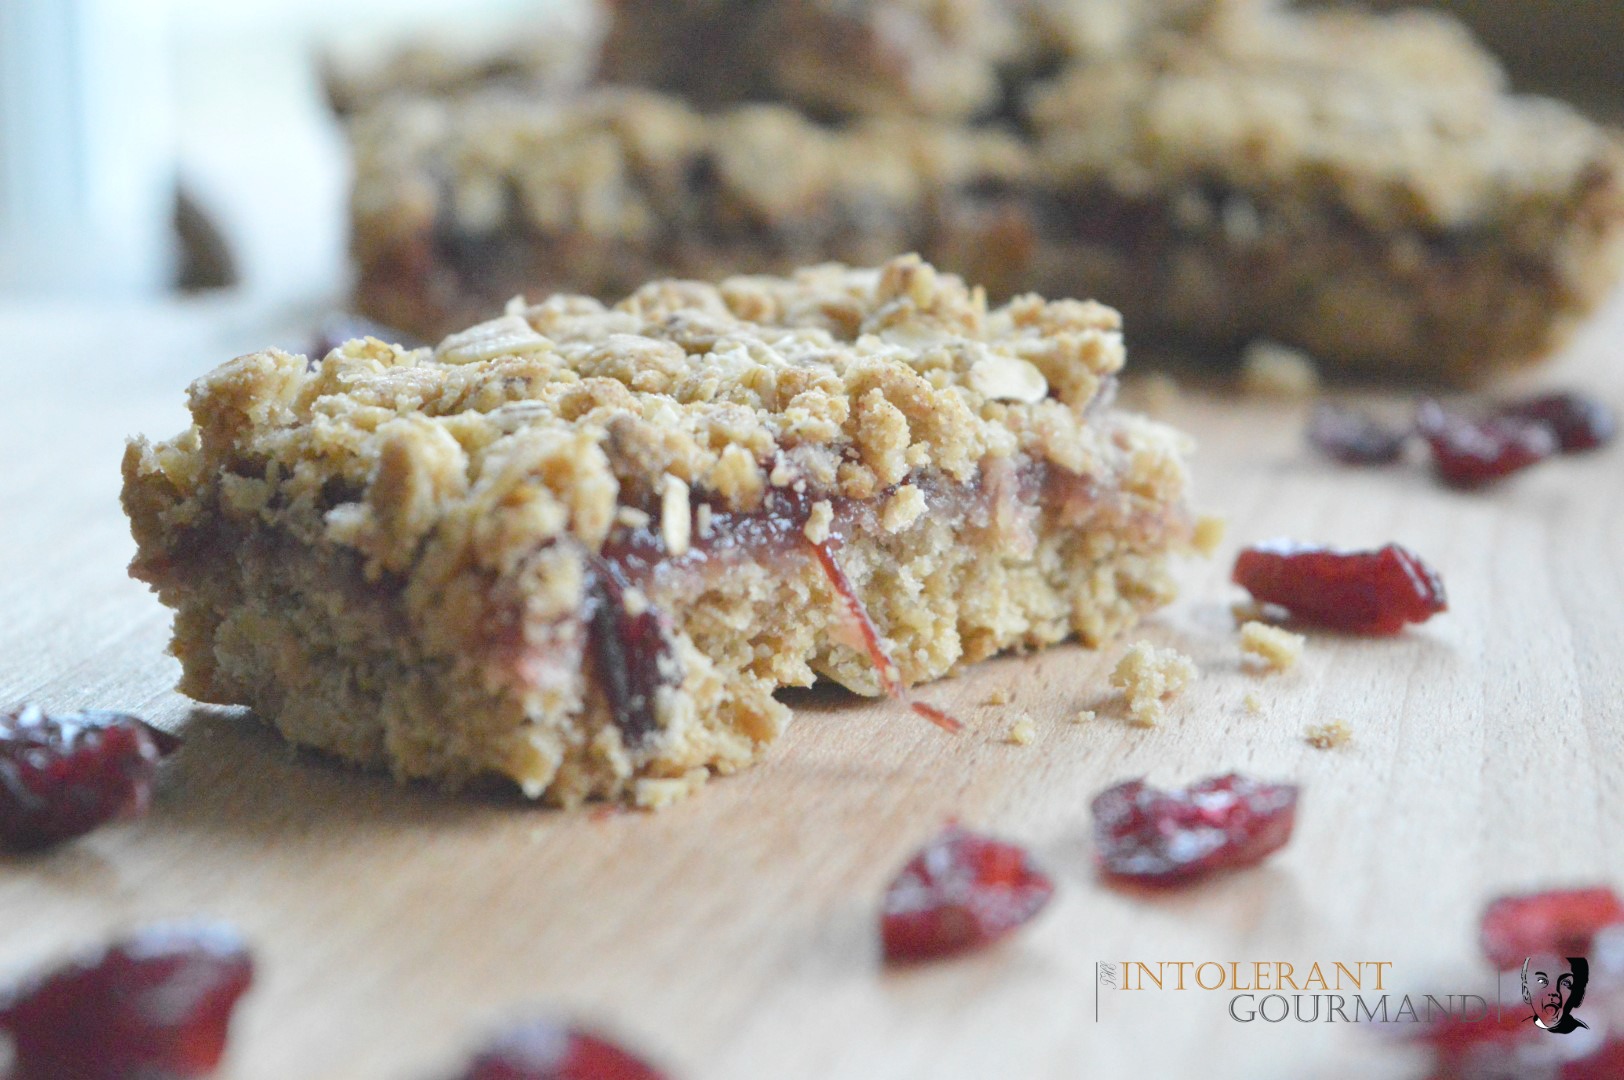 Cranberry Crumble Bar - vegan, gluten-free, nut-free and bursting with flavour! A simple, quick and easy to make treat! www.intolerantgourmand.com